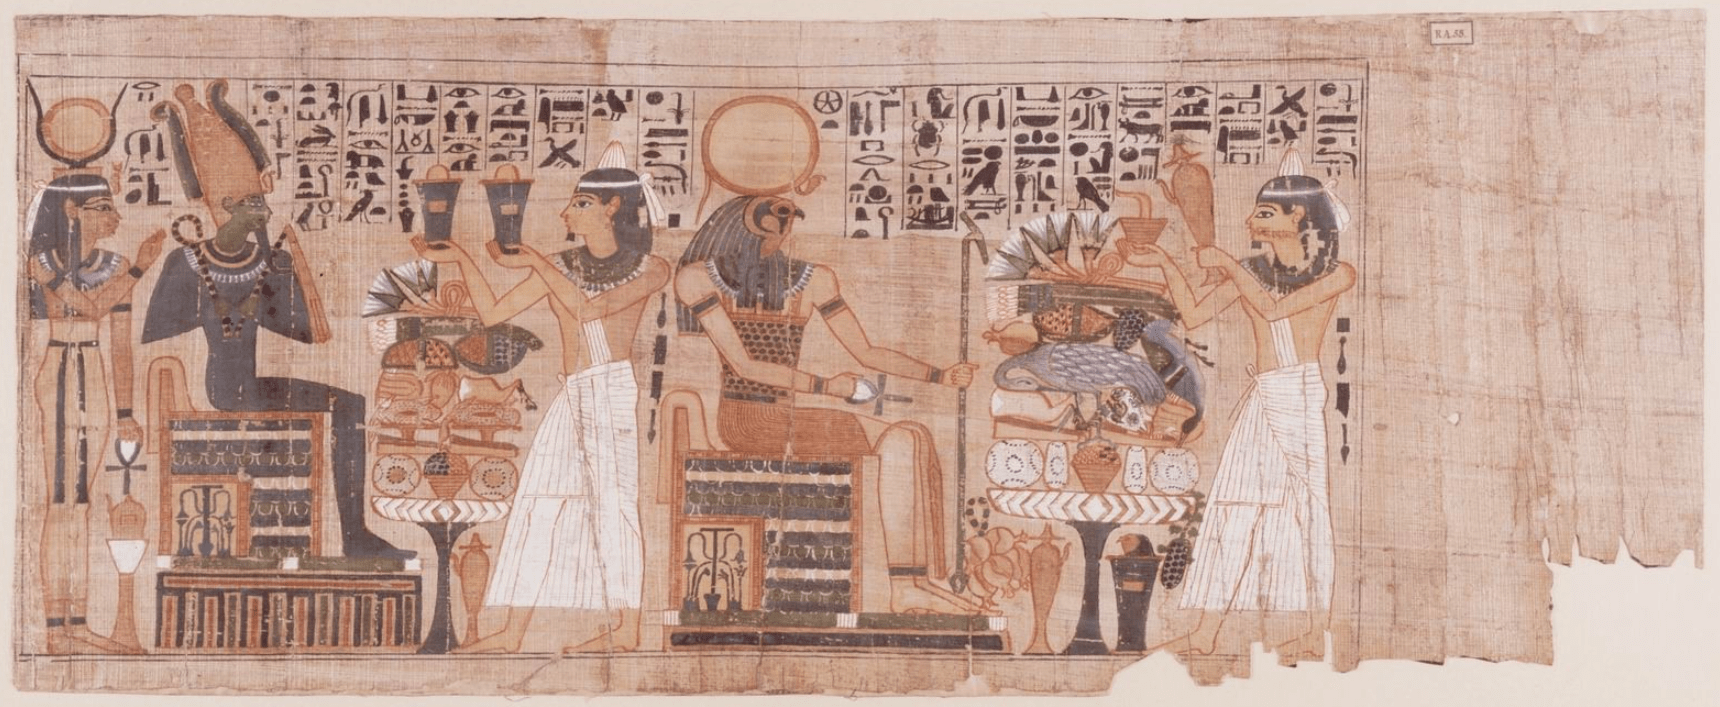 A papyrus scroll painted with hieroglyphs, gods, people, and offering tables.